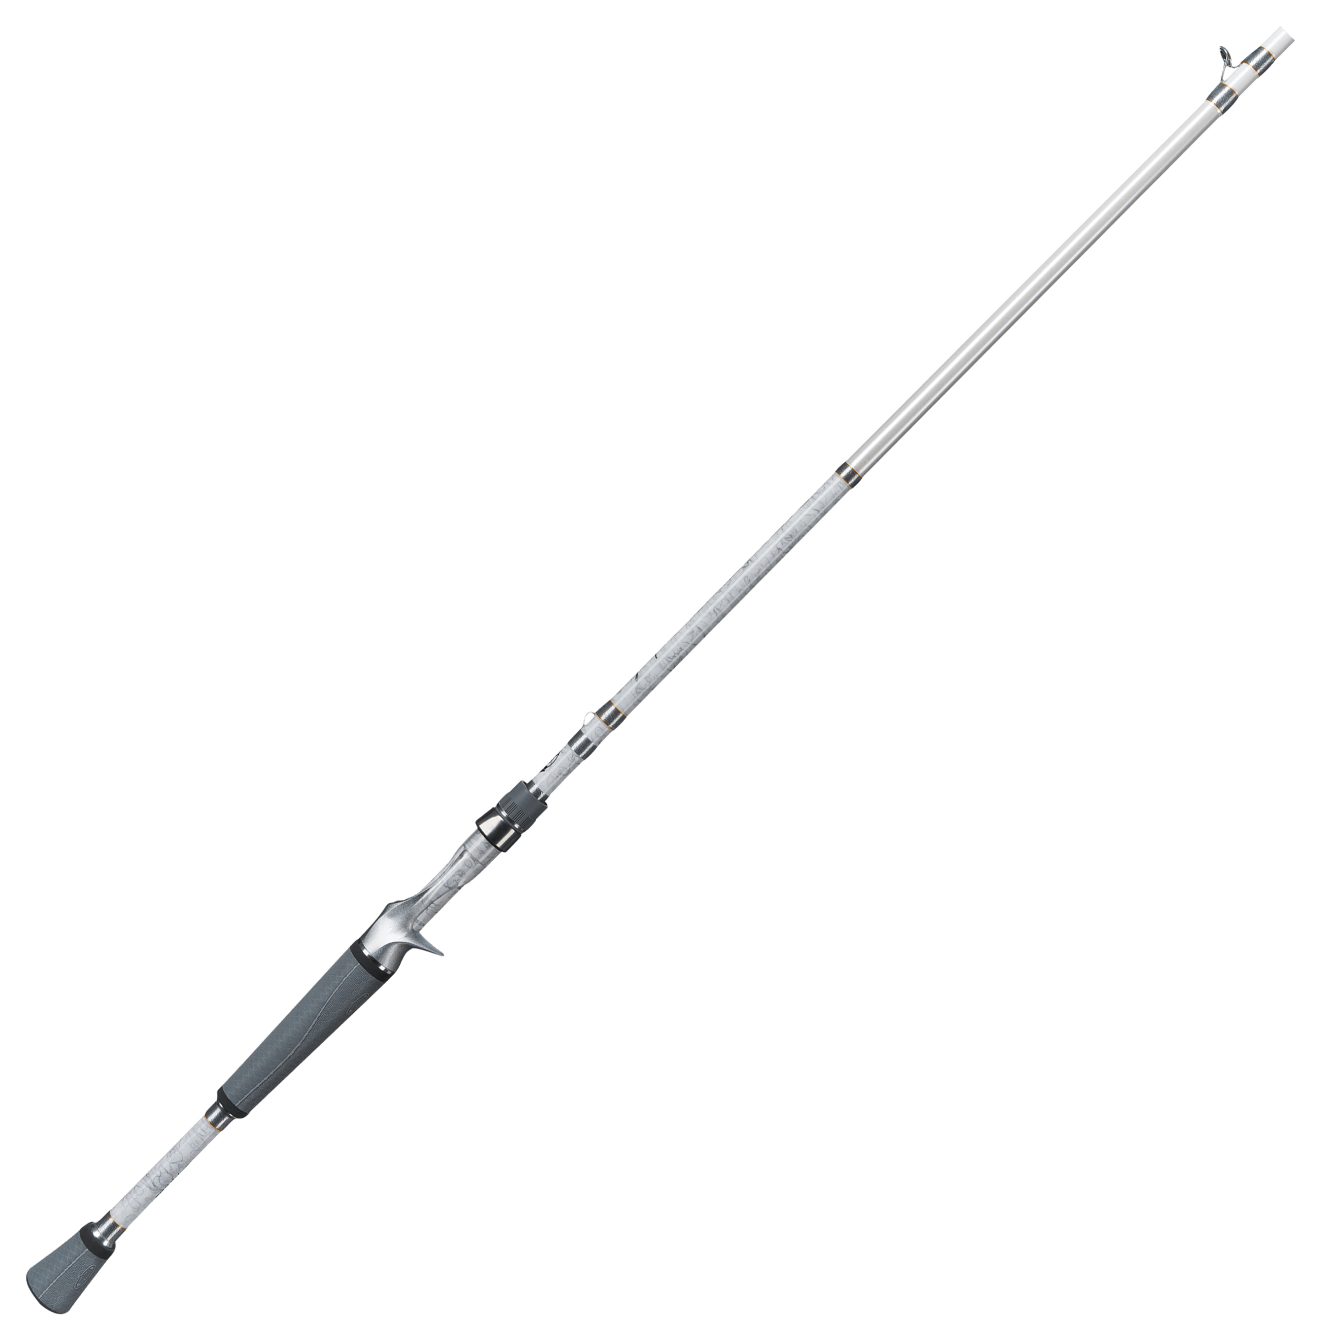 Bass Pro Shops Johnny Morris CarbonLite Casting Rod - fishing gifts for dad